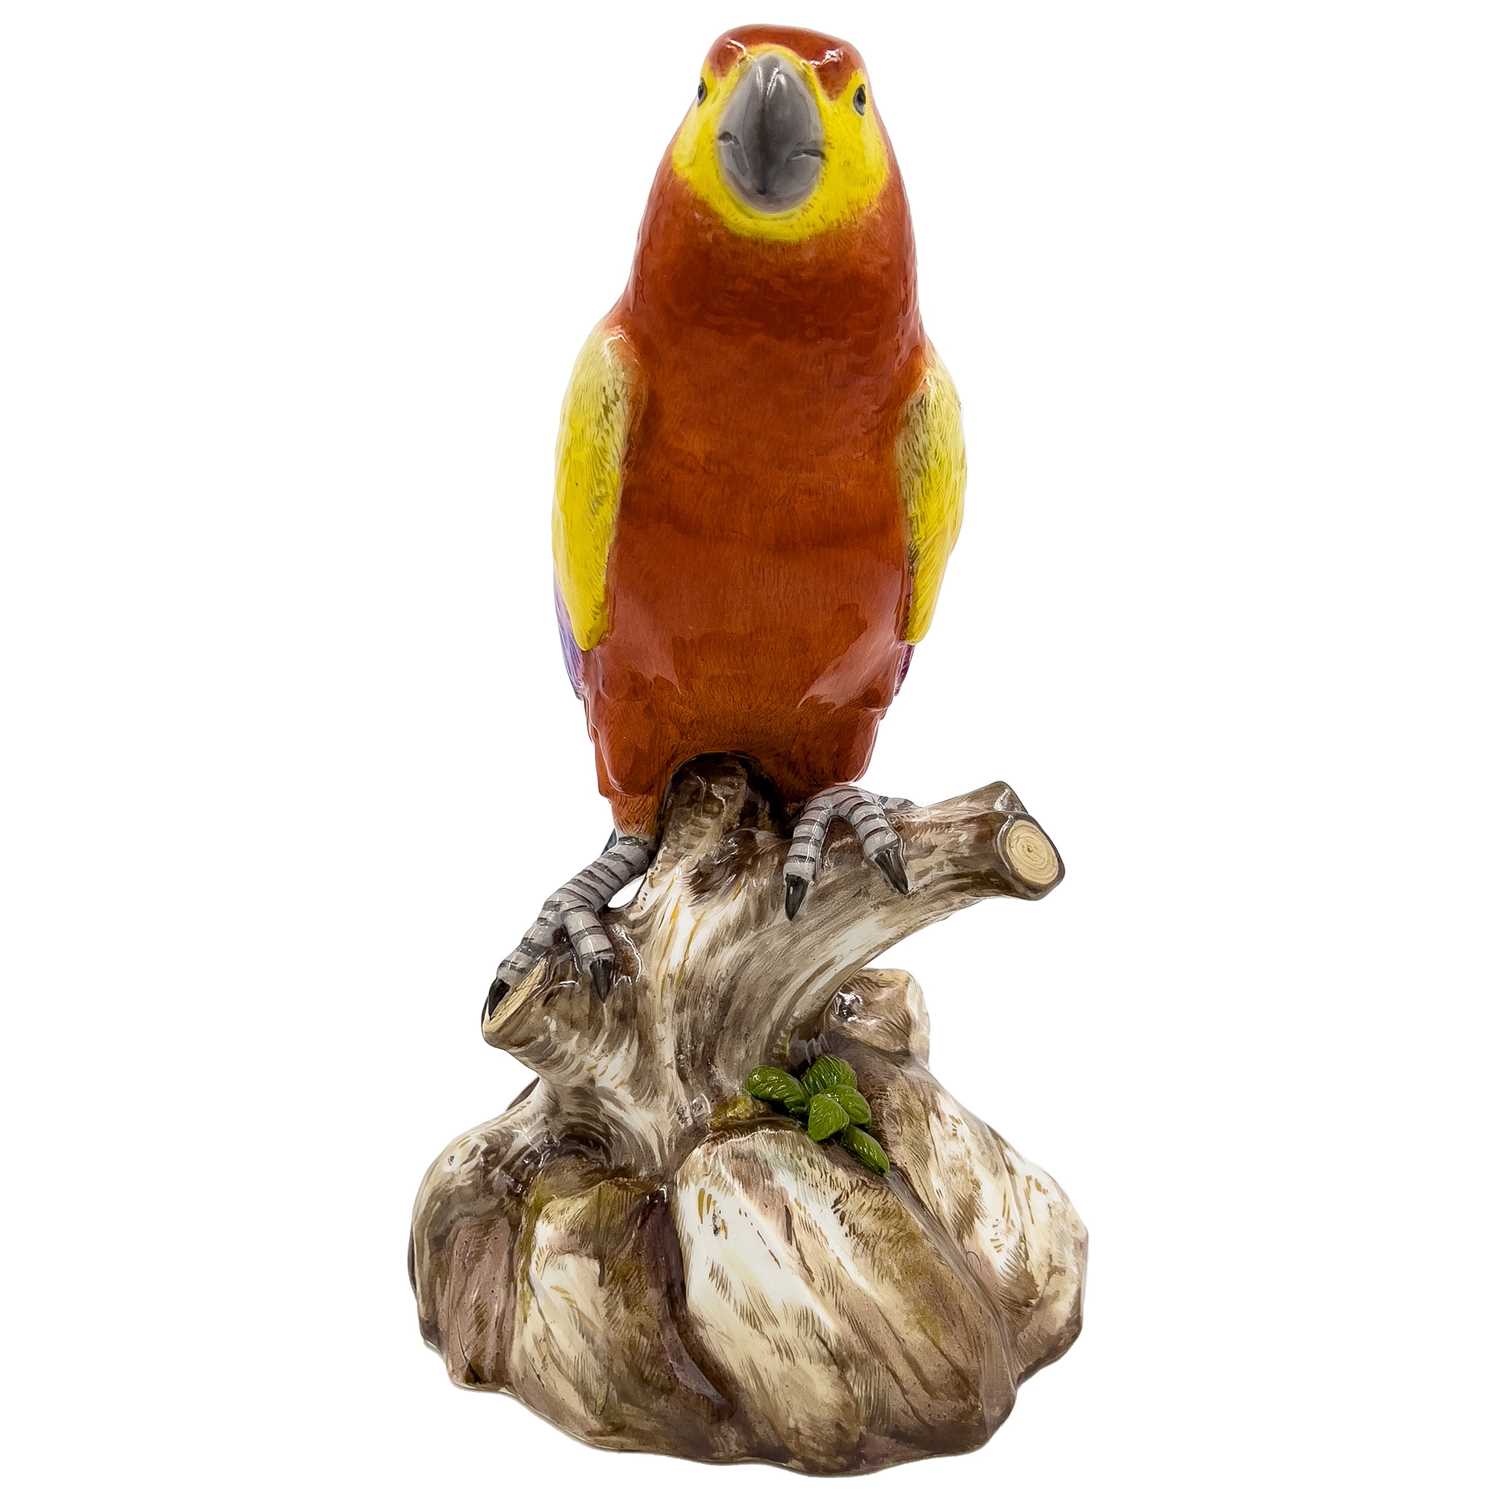 MEISSEN: A LARGE 19TH CENTURY PORCELAIN MODEL OF A PARROT - Image 2 of 7